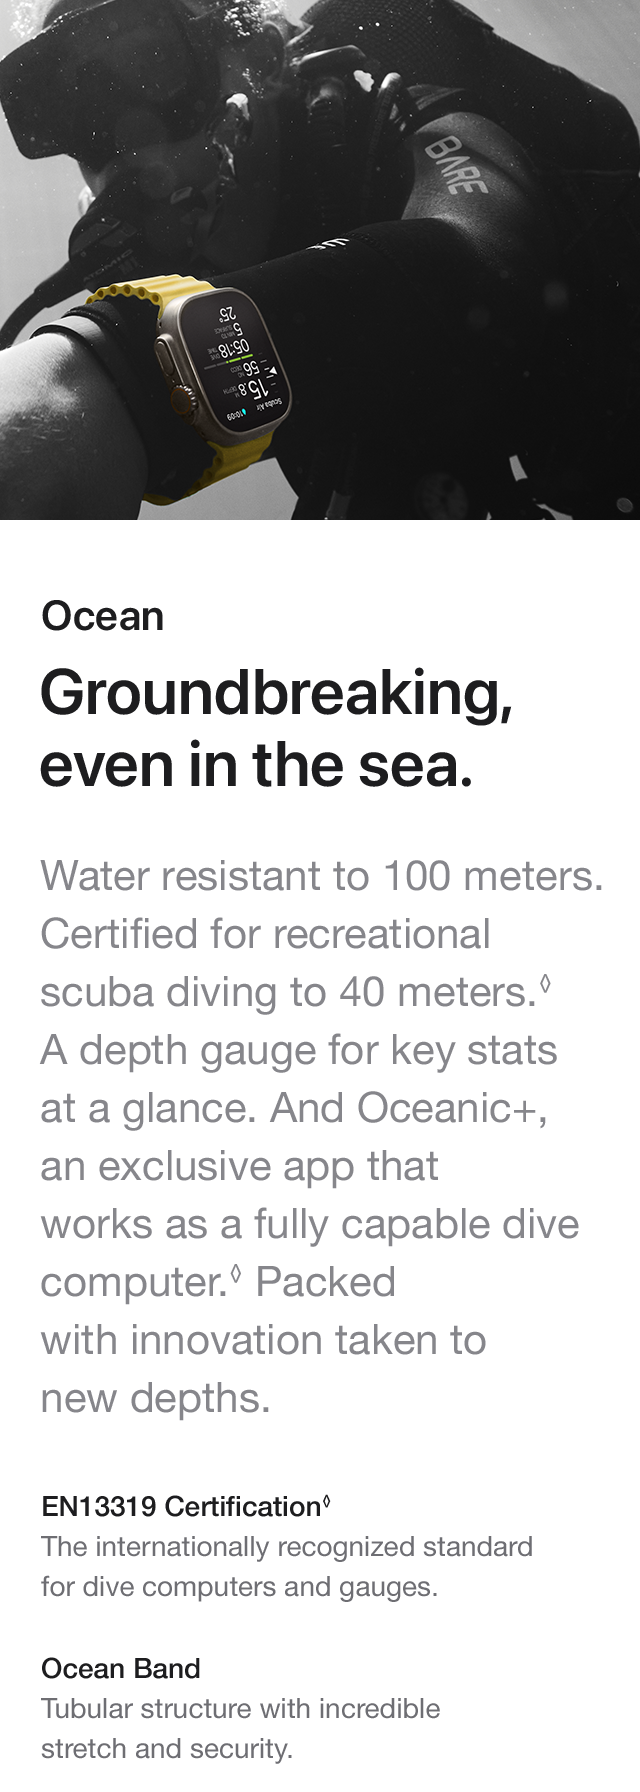 Ocean Groundbreaking, even in the sea. Water resistant to 100 meters. Certified for recreational scuba diving to 40 meters.A depth gauge for key stats at a glance. And Oceanic+, an exclusive app that works as a fully capable dive computer. Packed with innovation taken to new depths. EN13319 Certification The internationally recognized standardfor dive computers and gauges. Ocean Band Tubular structure with incredible stretch and security.